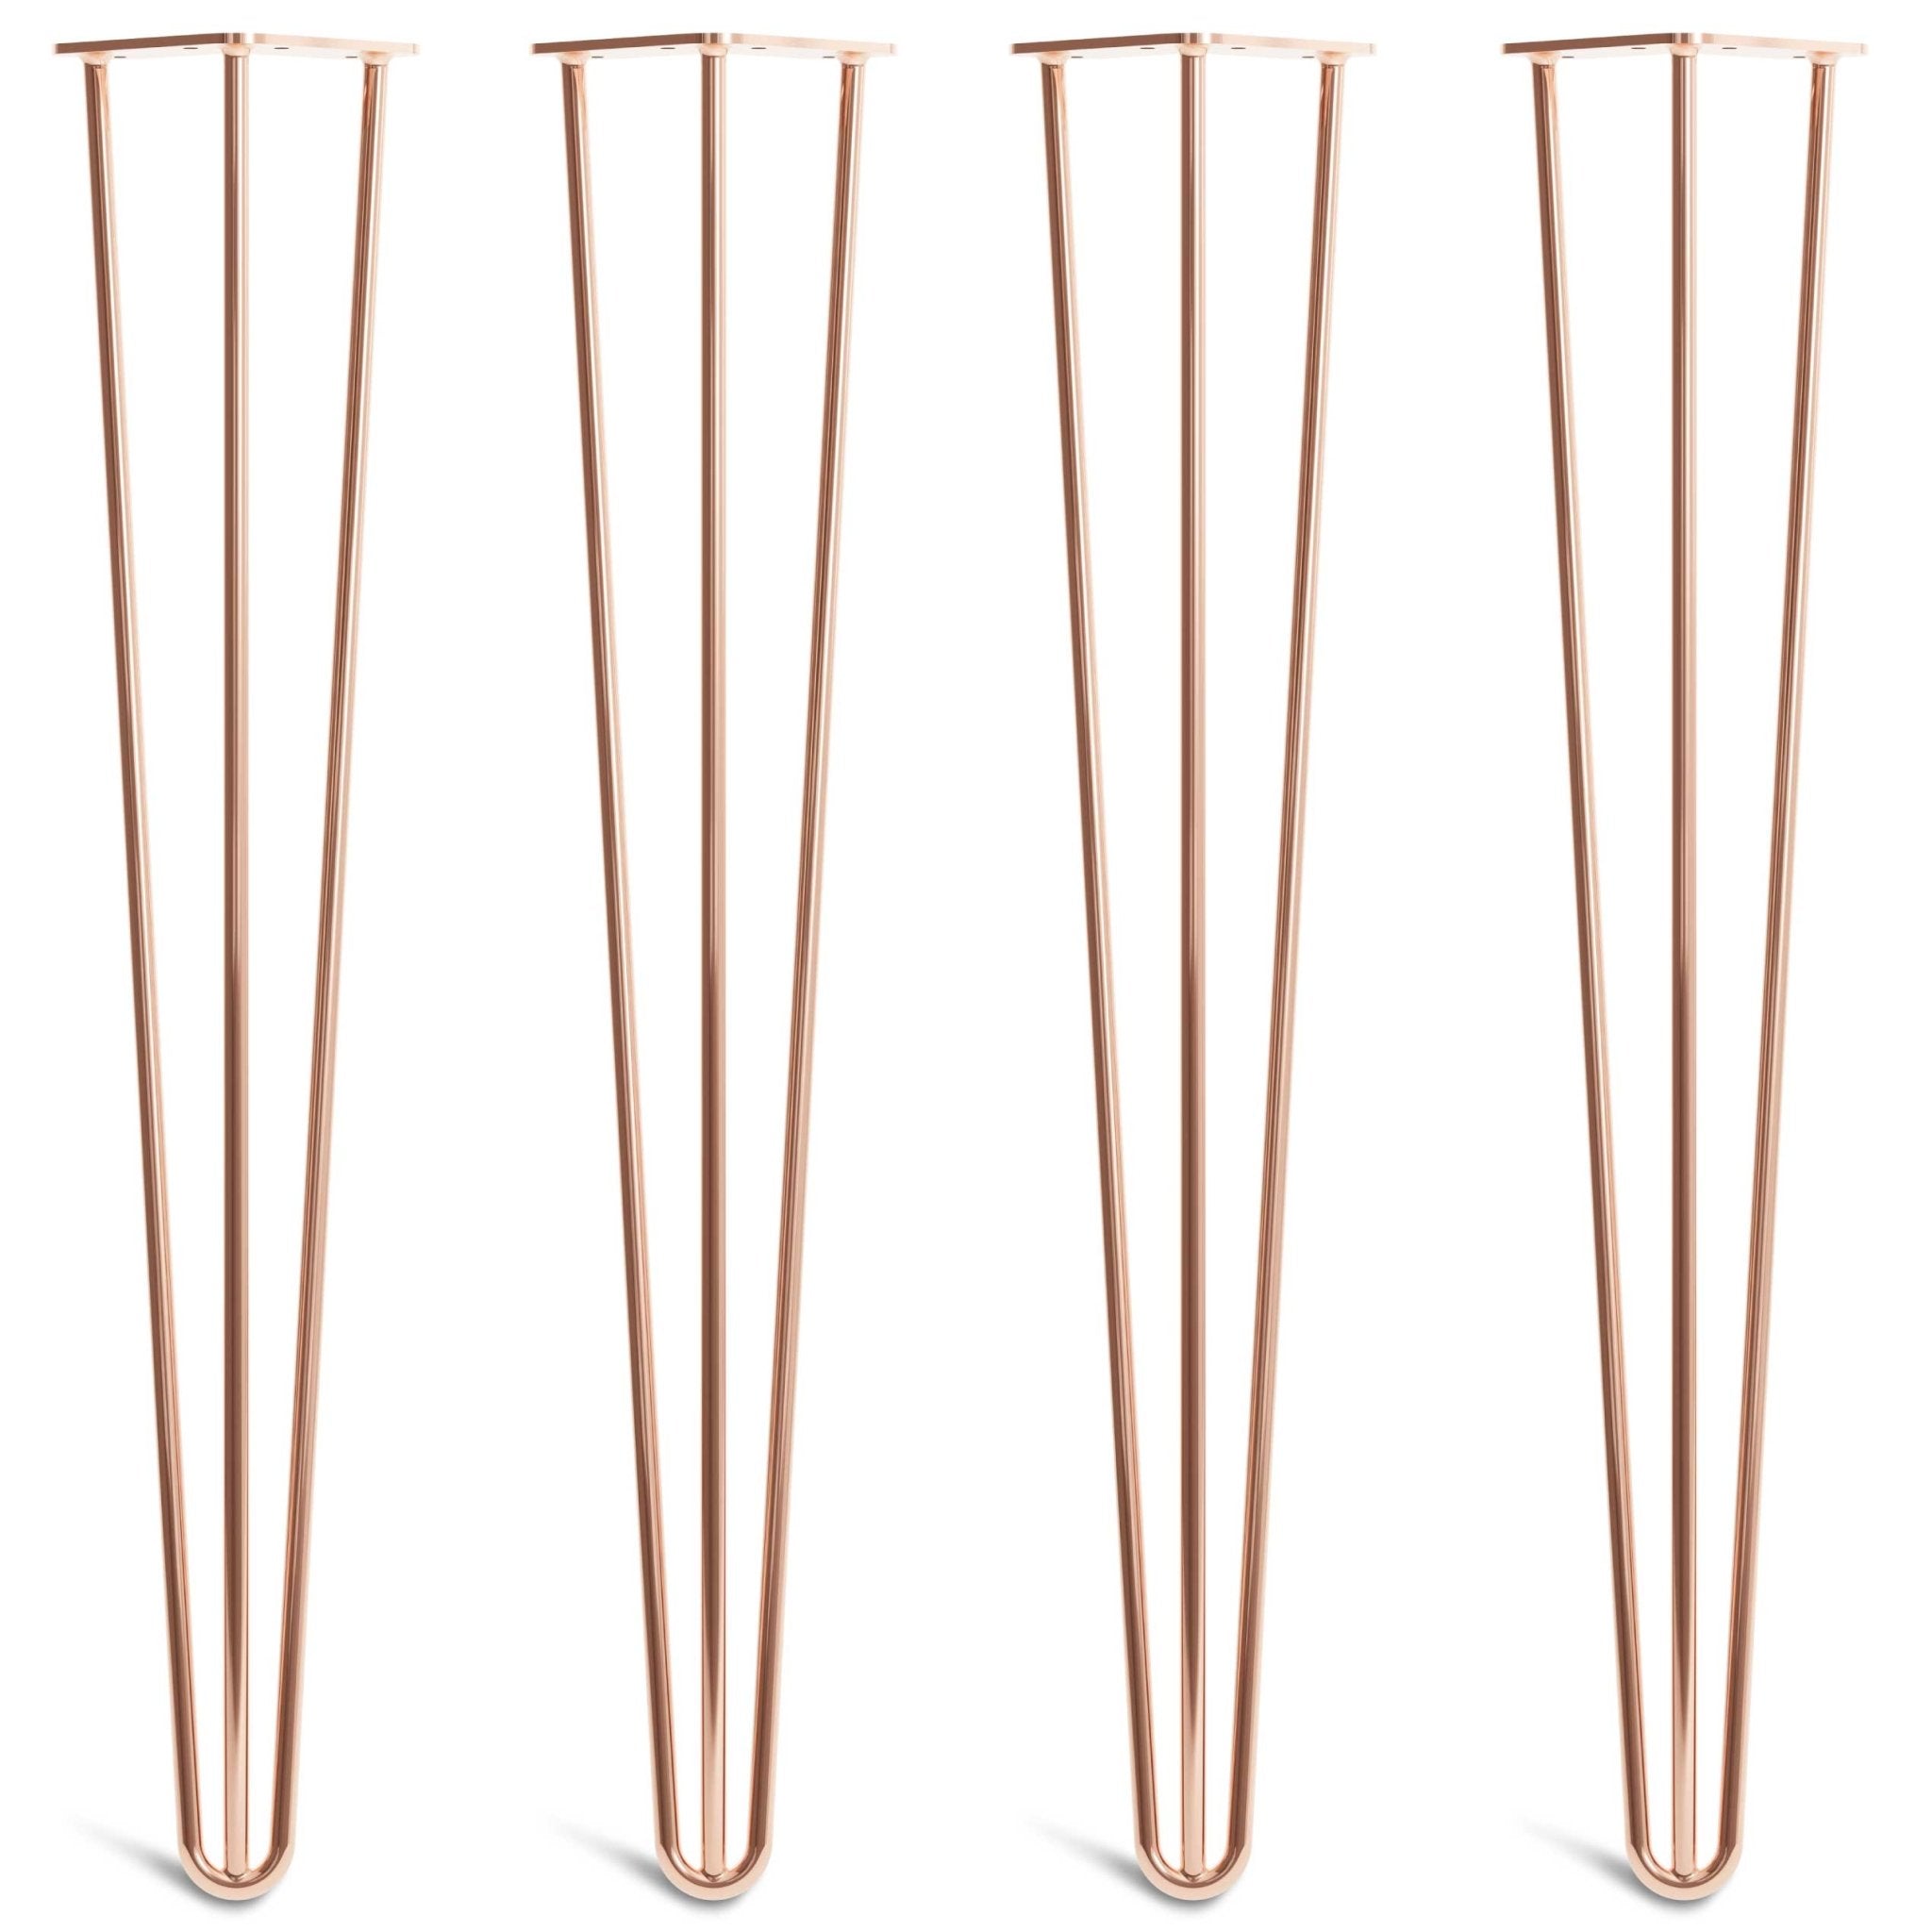 Copper Hairpin Legs-28" / 71cm - Desk & Dining Table-3 Rod-The Hairpin Leg Co.